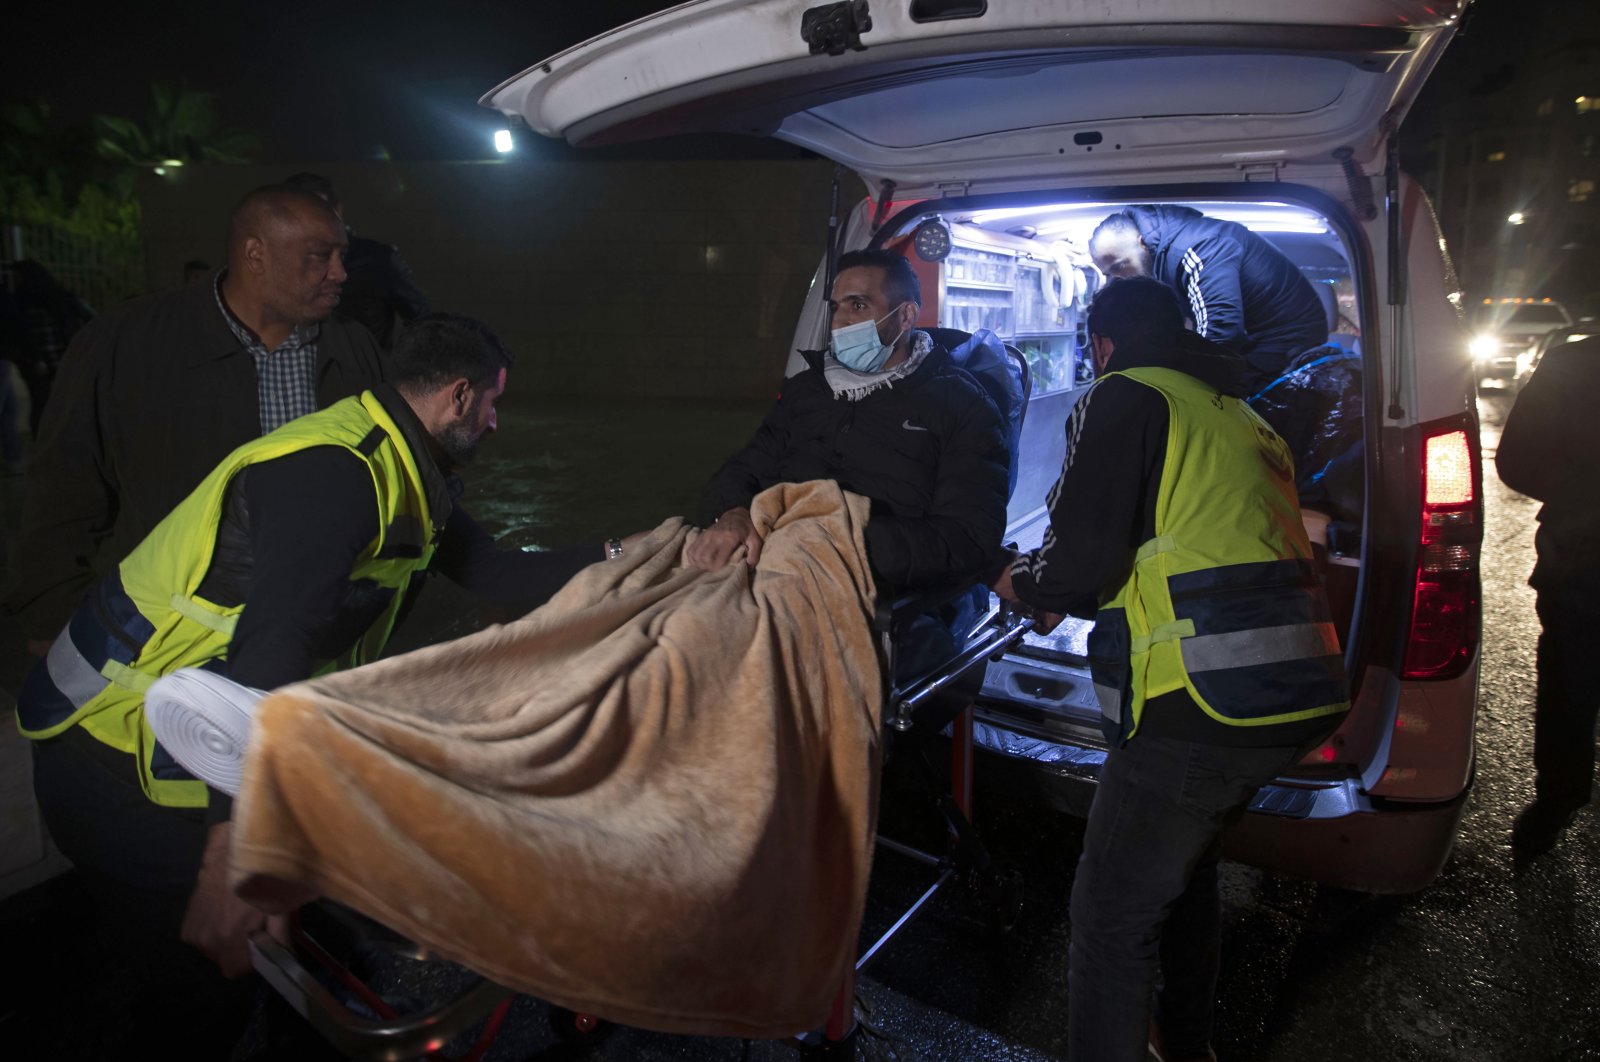 Former Palestinian prisoner Khaled Fasfous is taken out of an ambulance at the tomb of Palestinian leader Yasser Arafat, in the occupied West Bank city of Ramallah, Palestine, Dec. 5, 2021. (AP Photo)